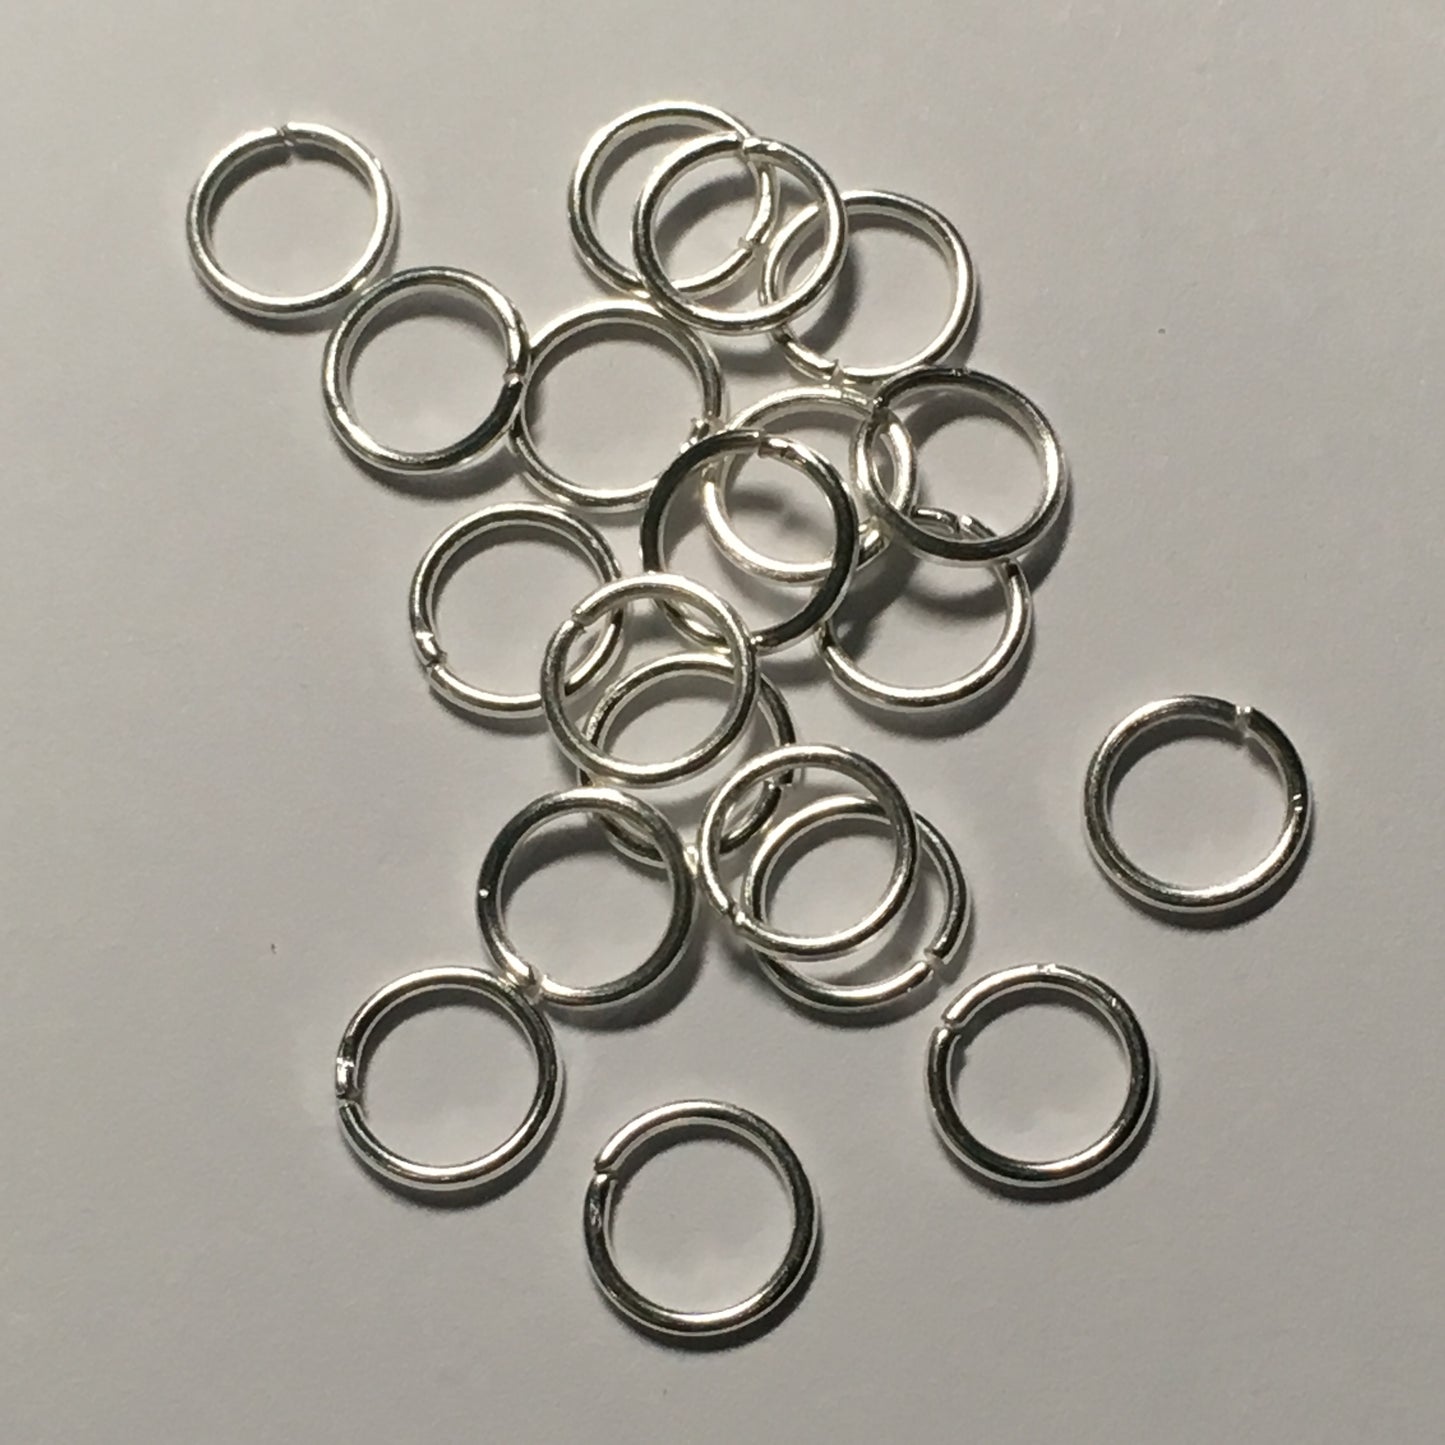 6 mm 21-Gauge Bright Silver Unsoldered Split 0.71 mm Plated Iron Jump Rings - 20 Rings